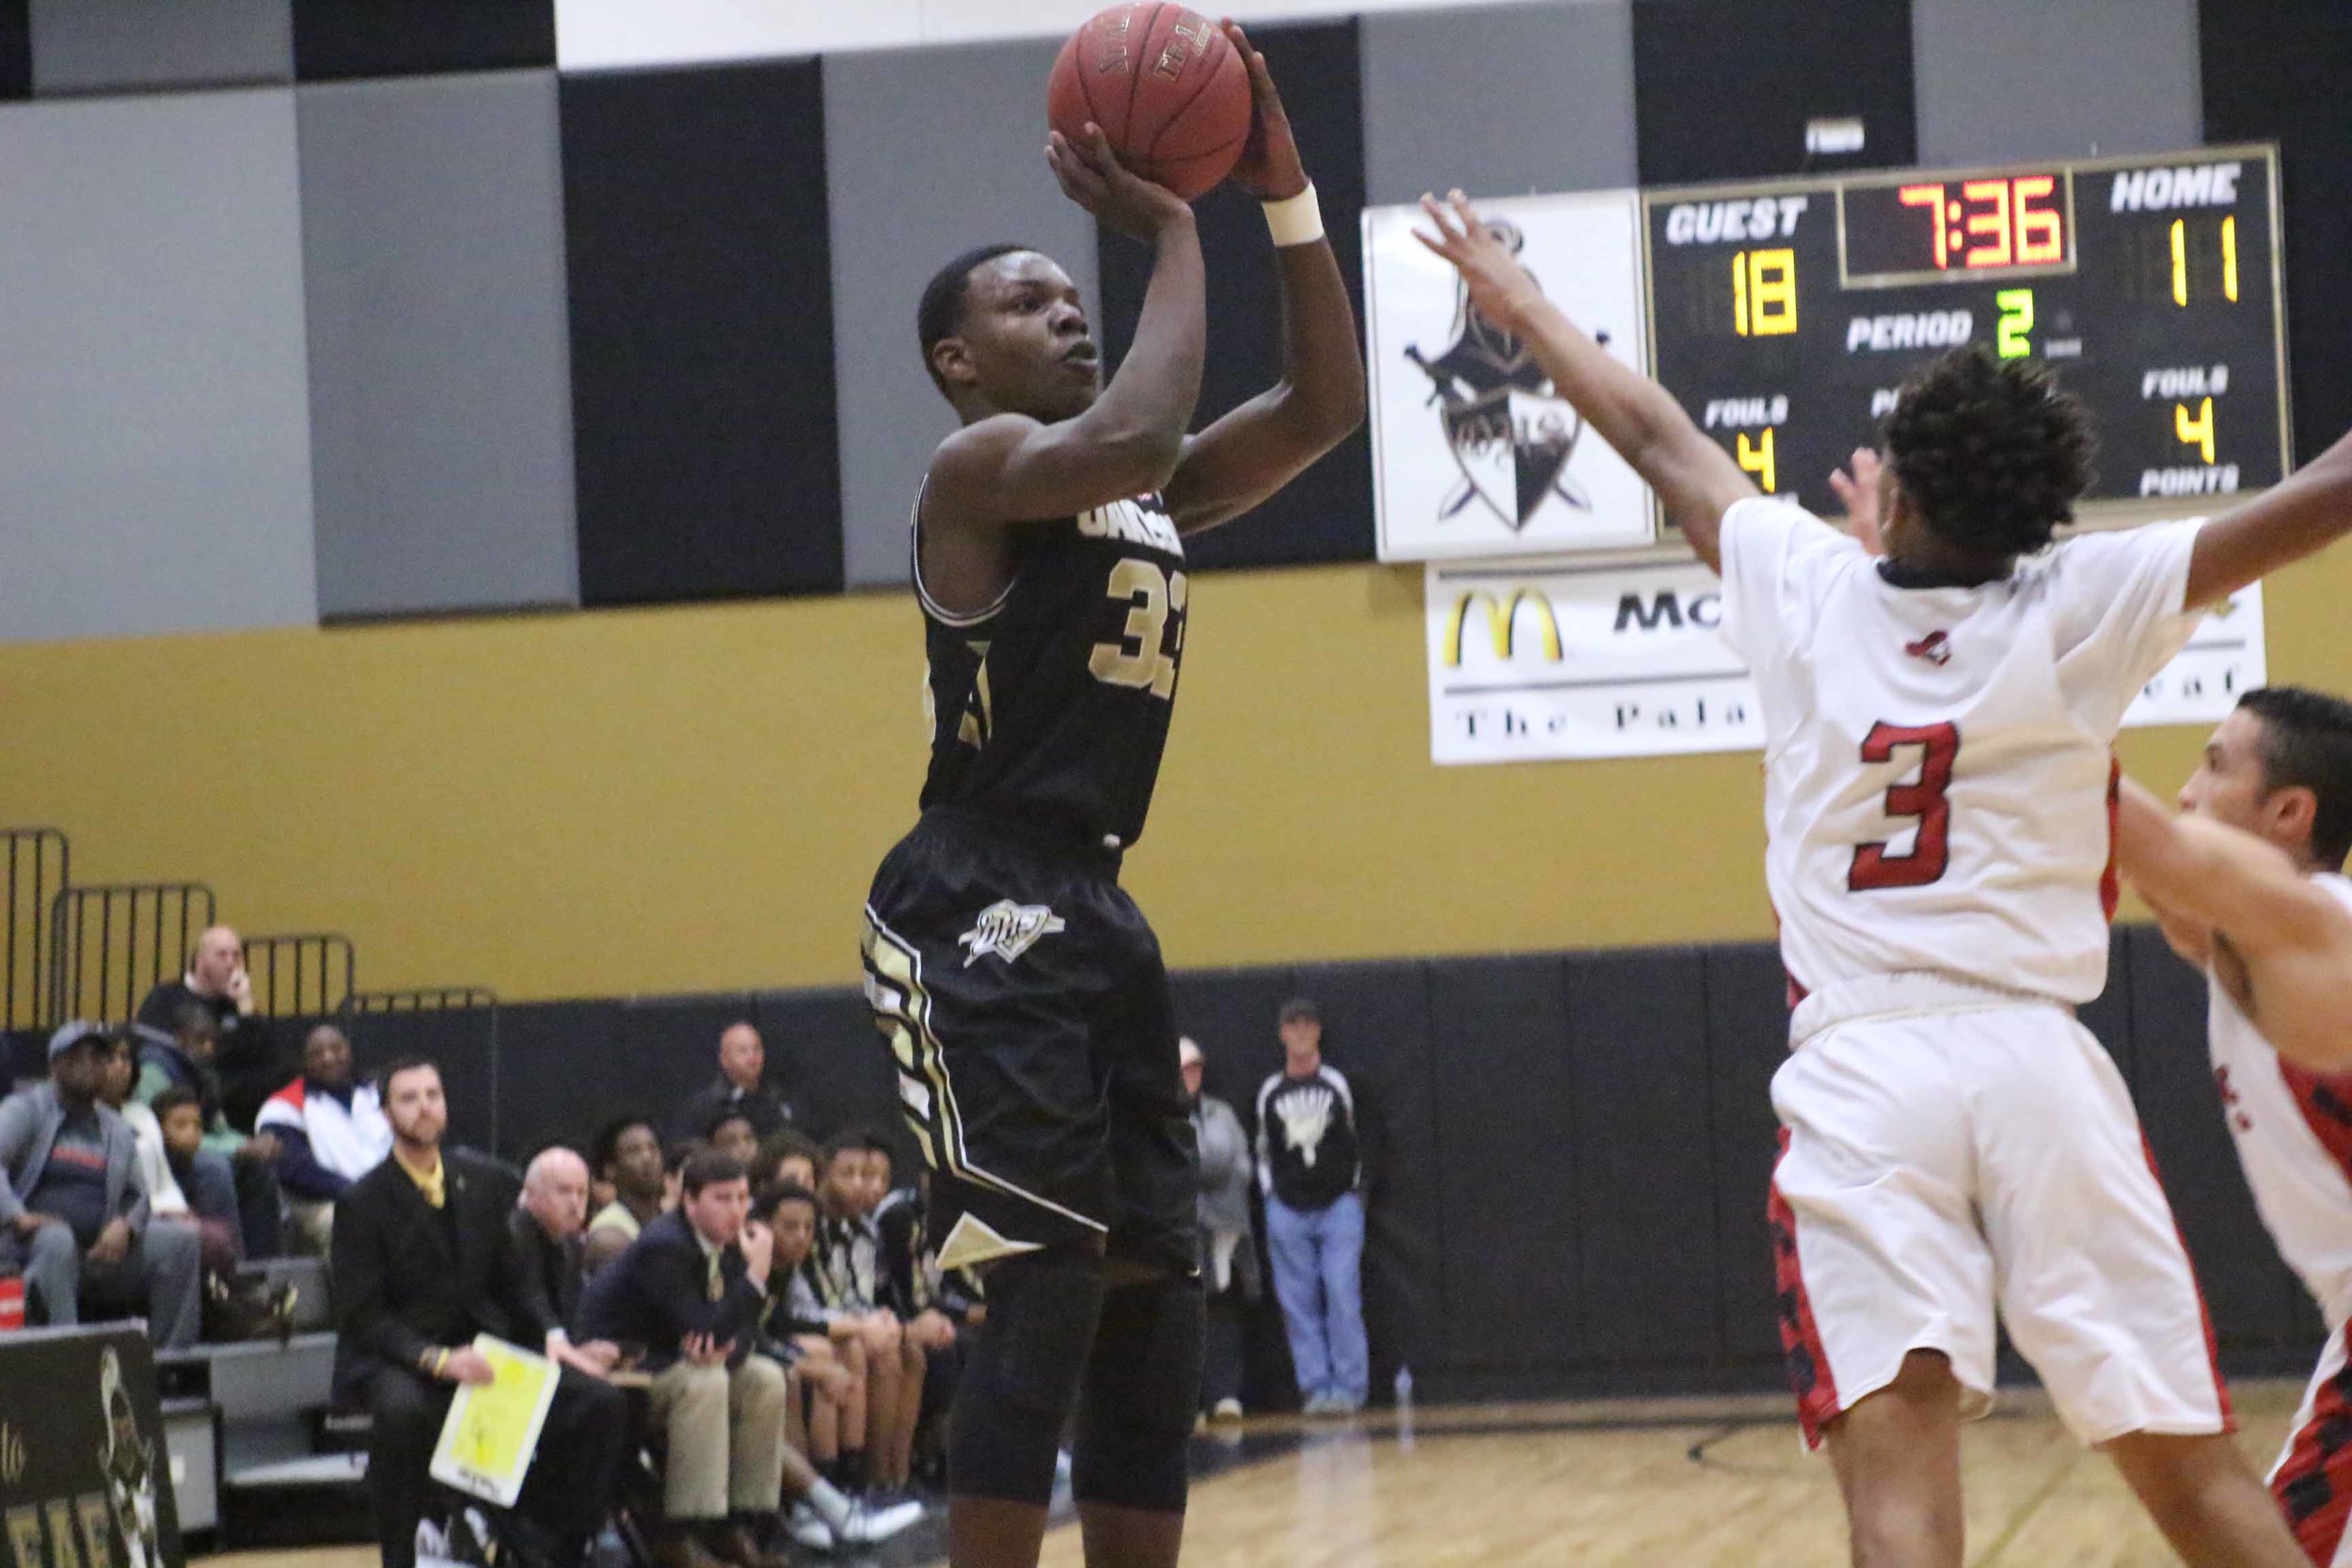 Oakleaf High junior Jonathan Bryant, above, was instrumental in putting the final touches on the Knights’ district championship run with a week of high-scoring games.